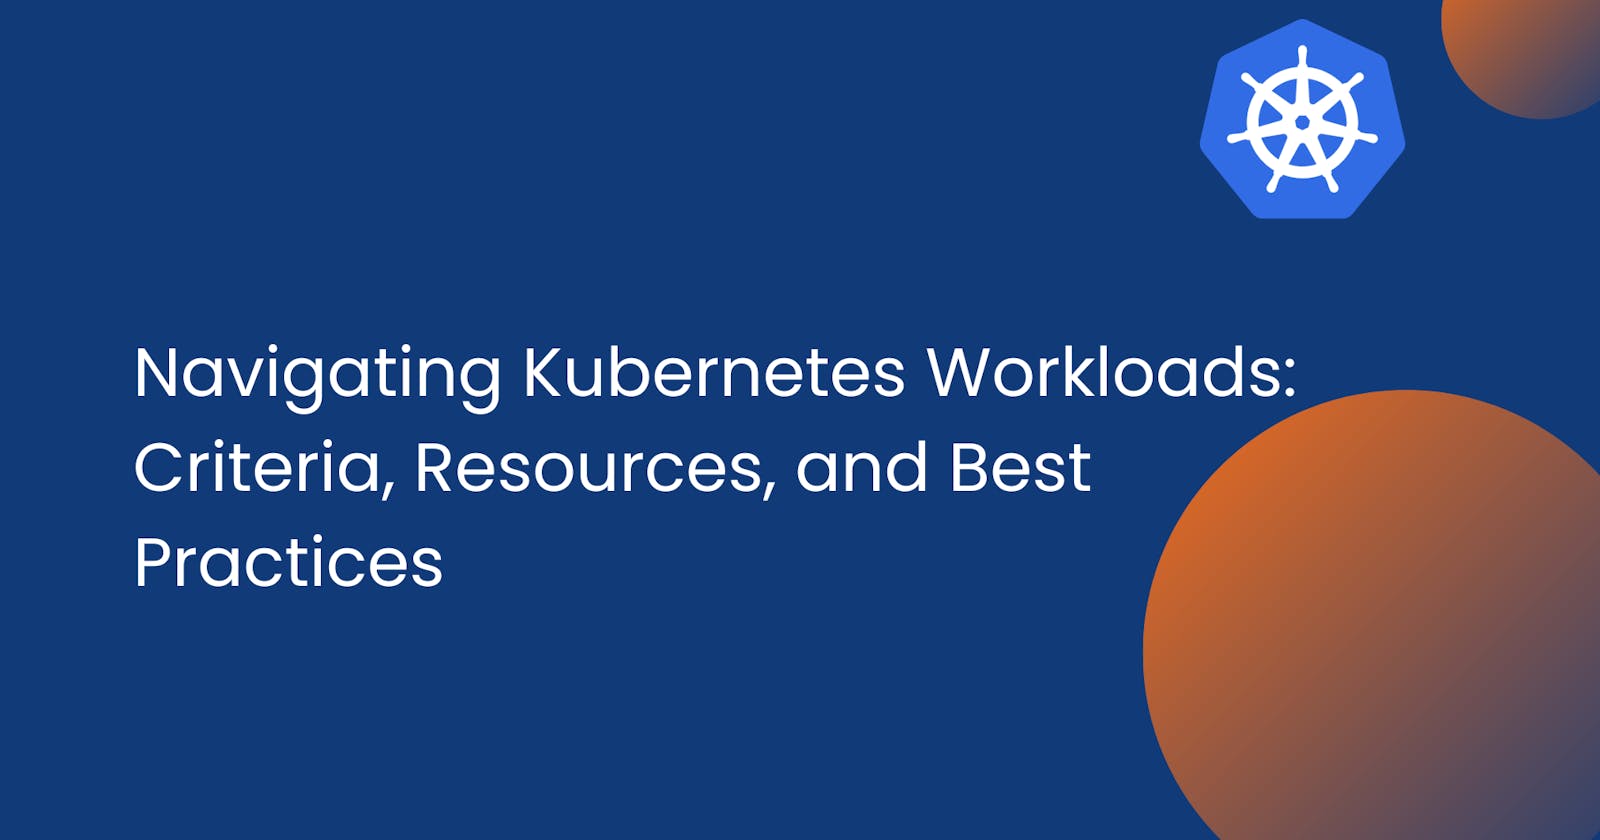 Navigating Kubernetes Workloads: Criteria, Resources, and Best Practices